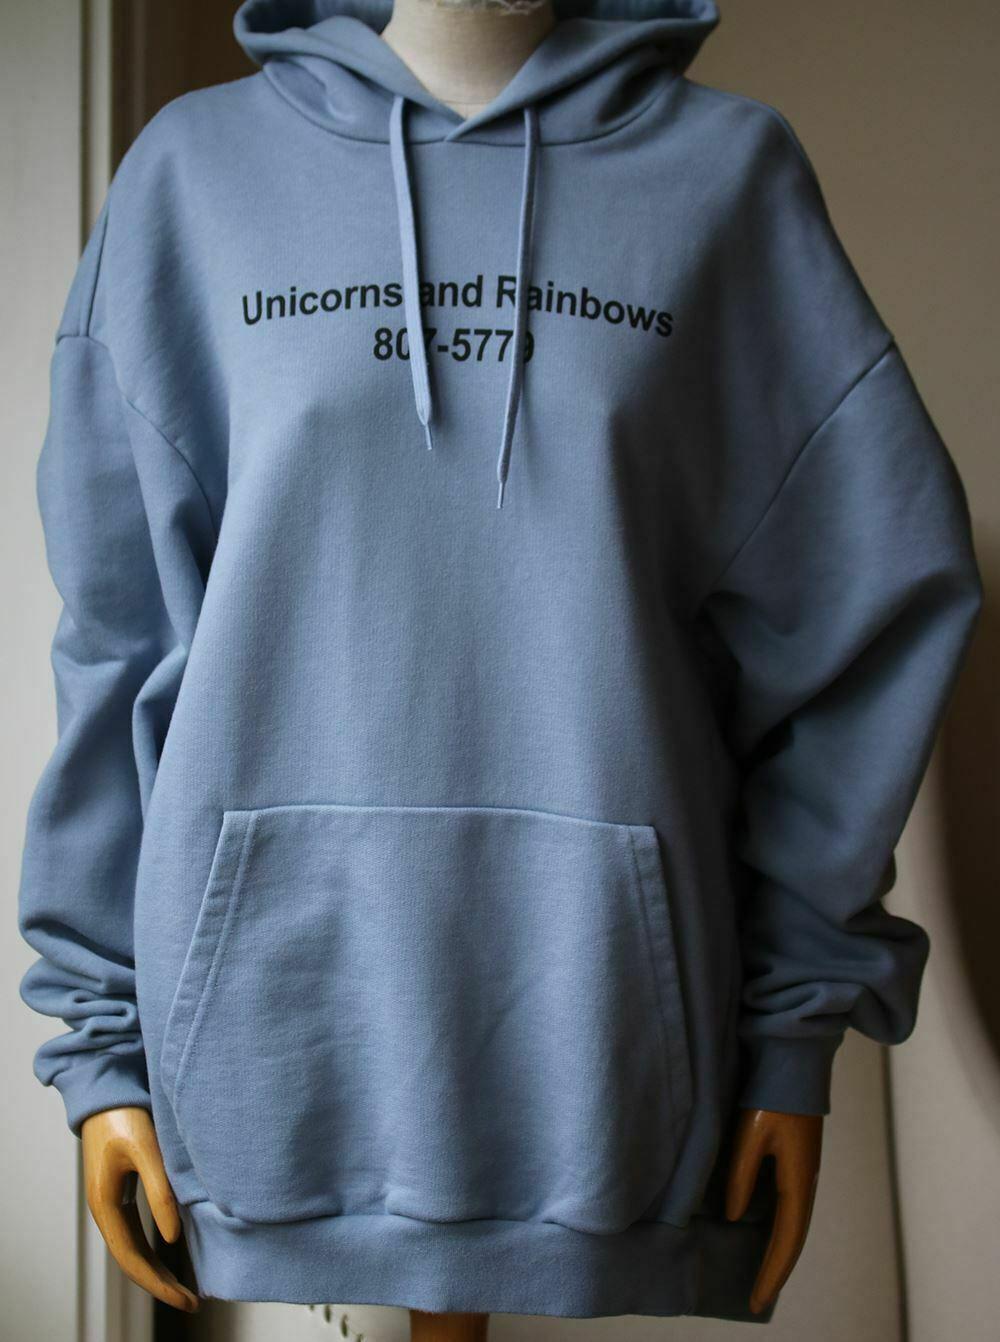 Rather than hosting a runway show, Vetements presented its Spring '18 collection in a car park - the clothing was shot by Demna Gvasalia on locals in 57 locations around Zürich. Part of the lineup, this stretch cotton-jersey hooded top has 'Unicorns